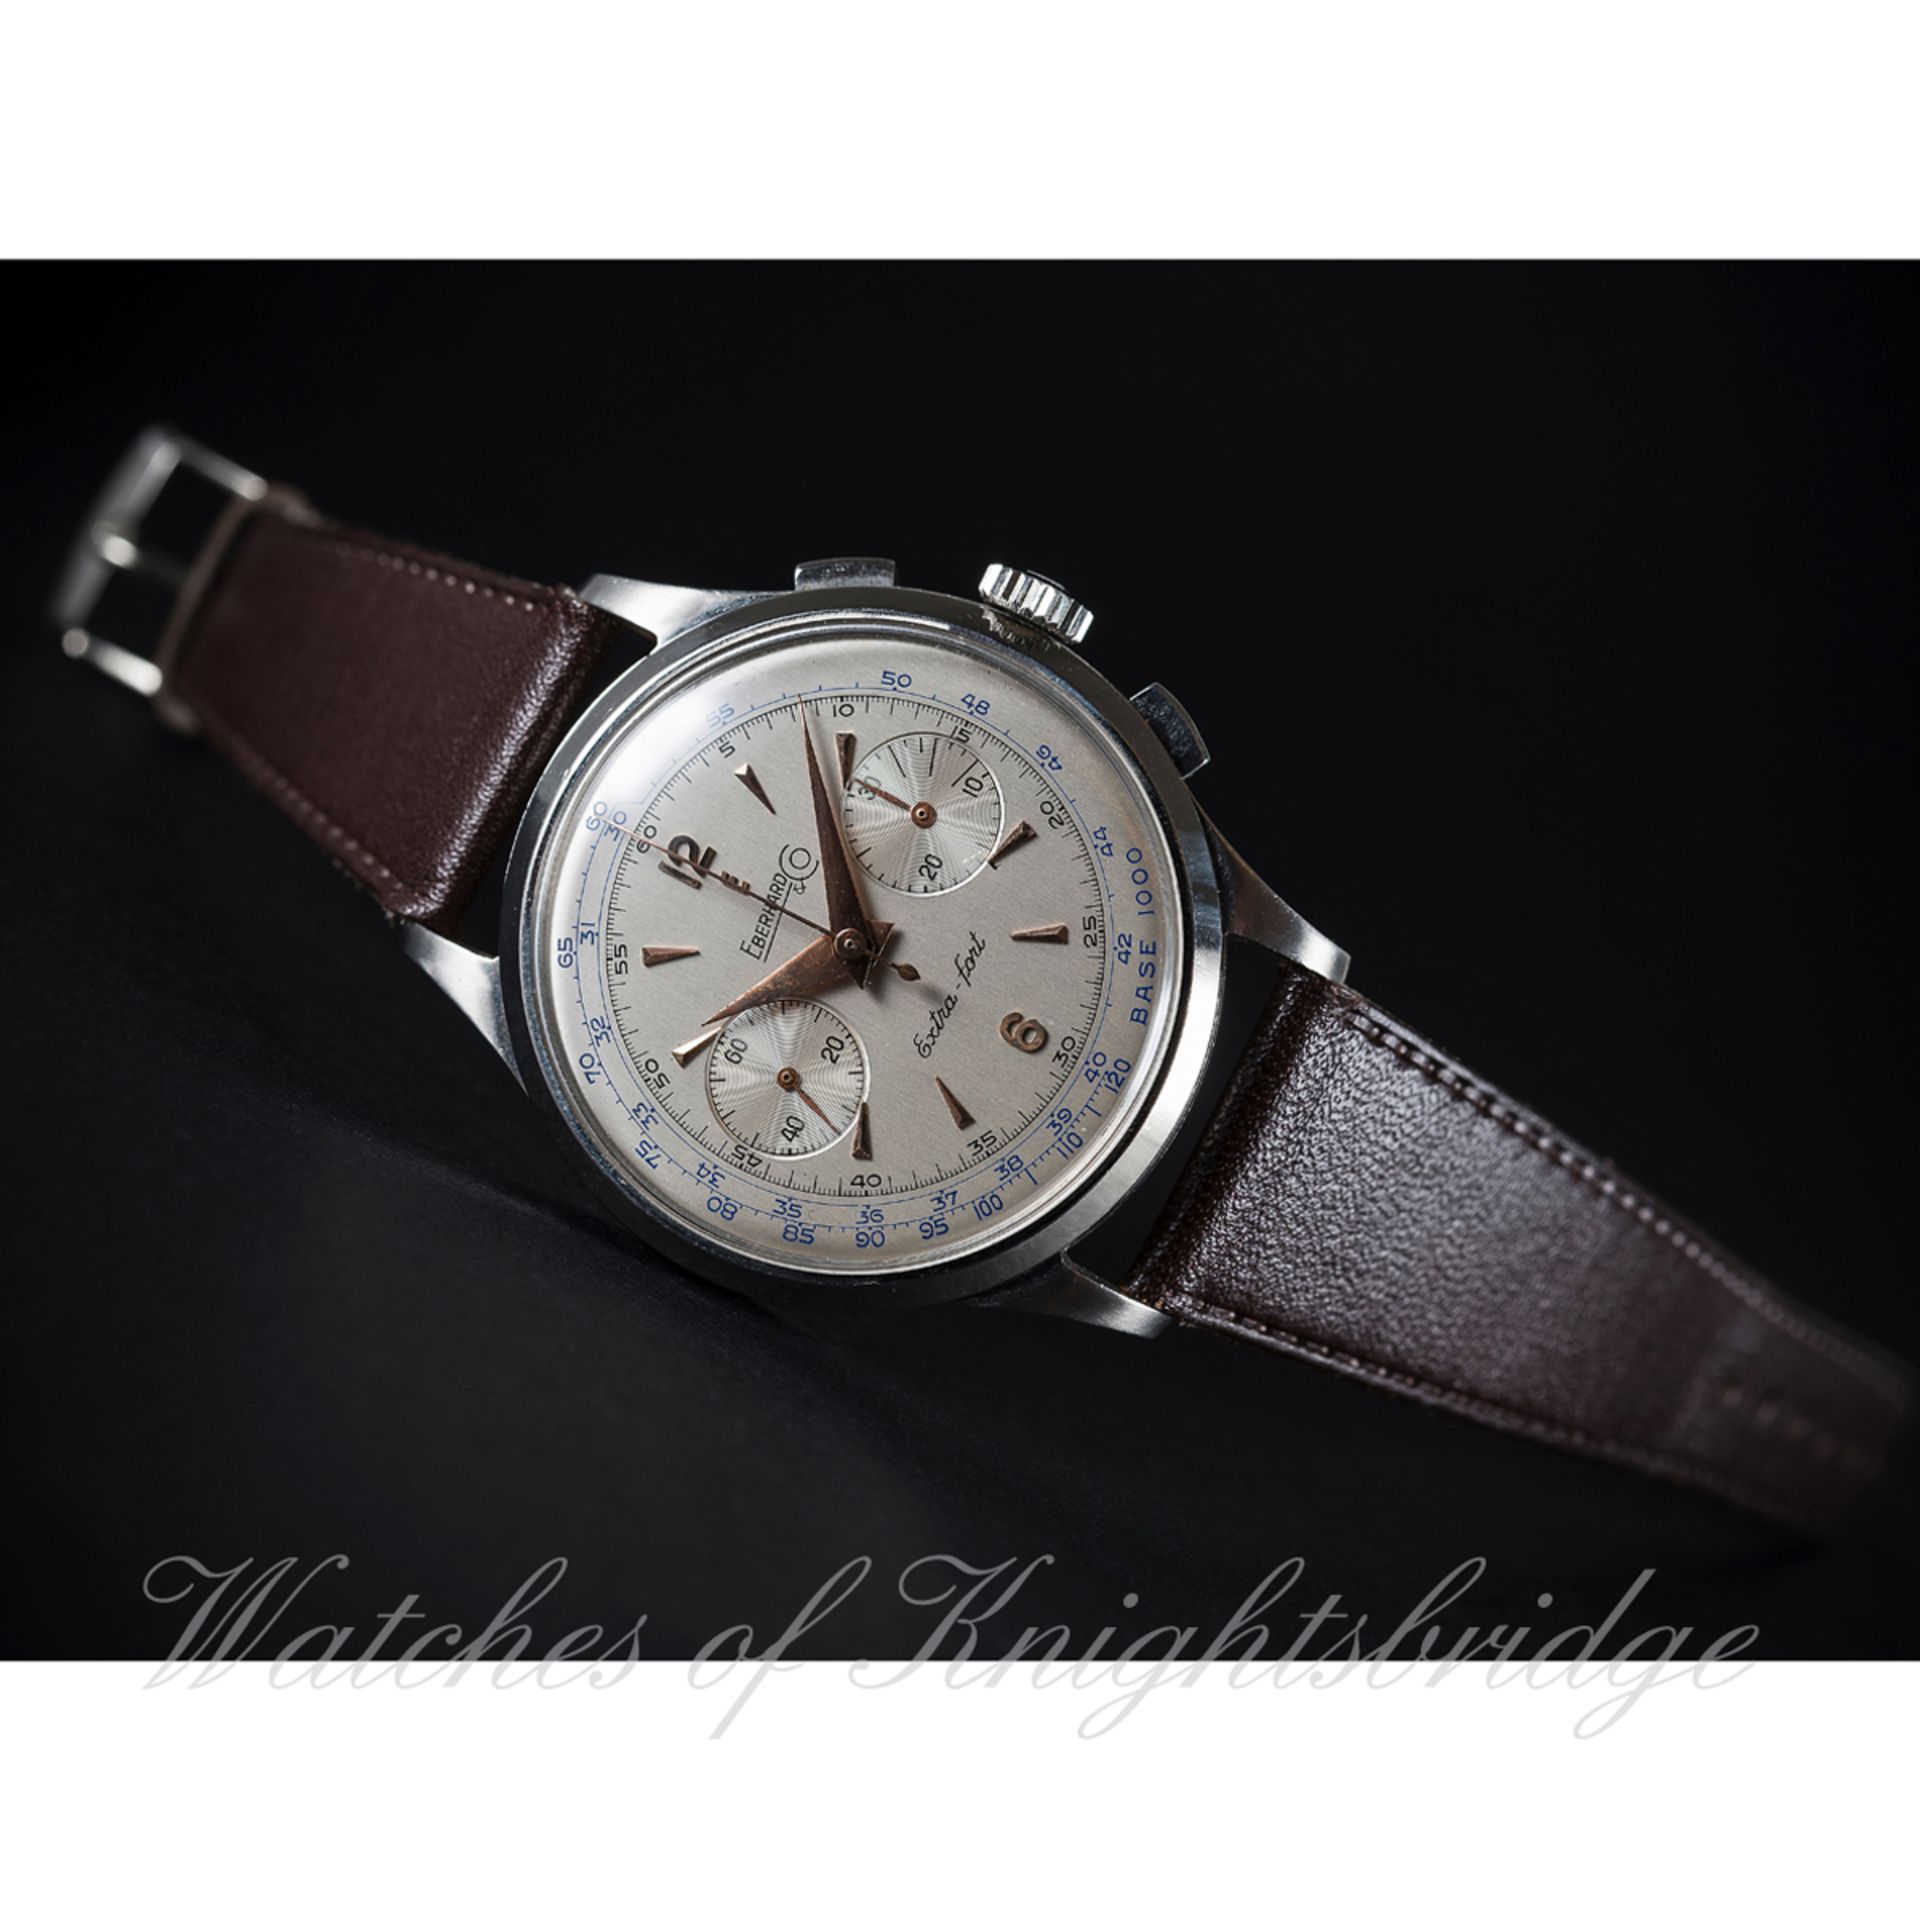 A RARE GENTLEMAN'S STAINLESS STEEL EBERHARD & CO EXTRA FORT CHRONOGRAPH WRIST WATCH CIRCA 1950s, - Image 2 of 2